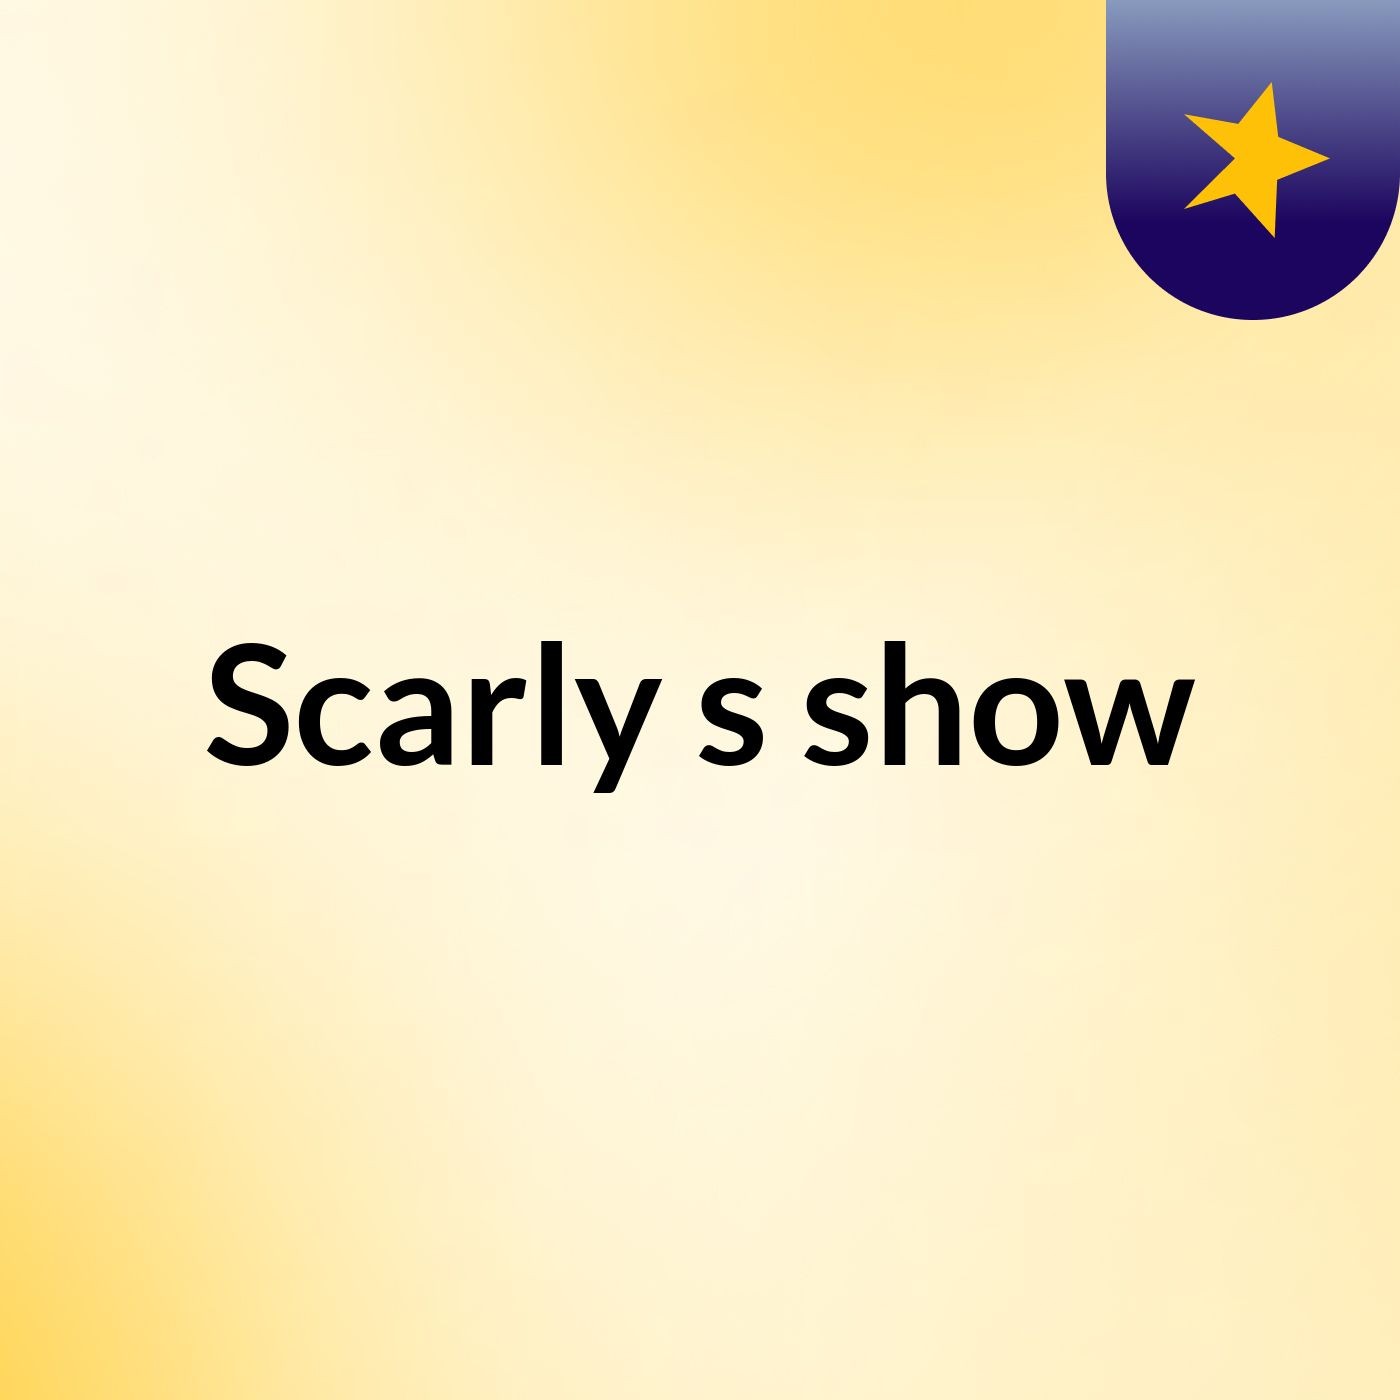 Scarly's show